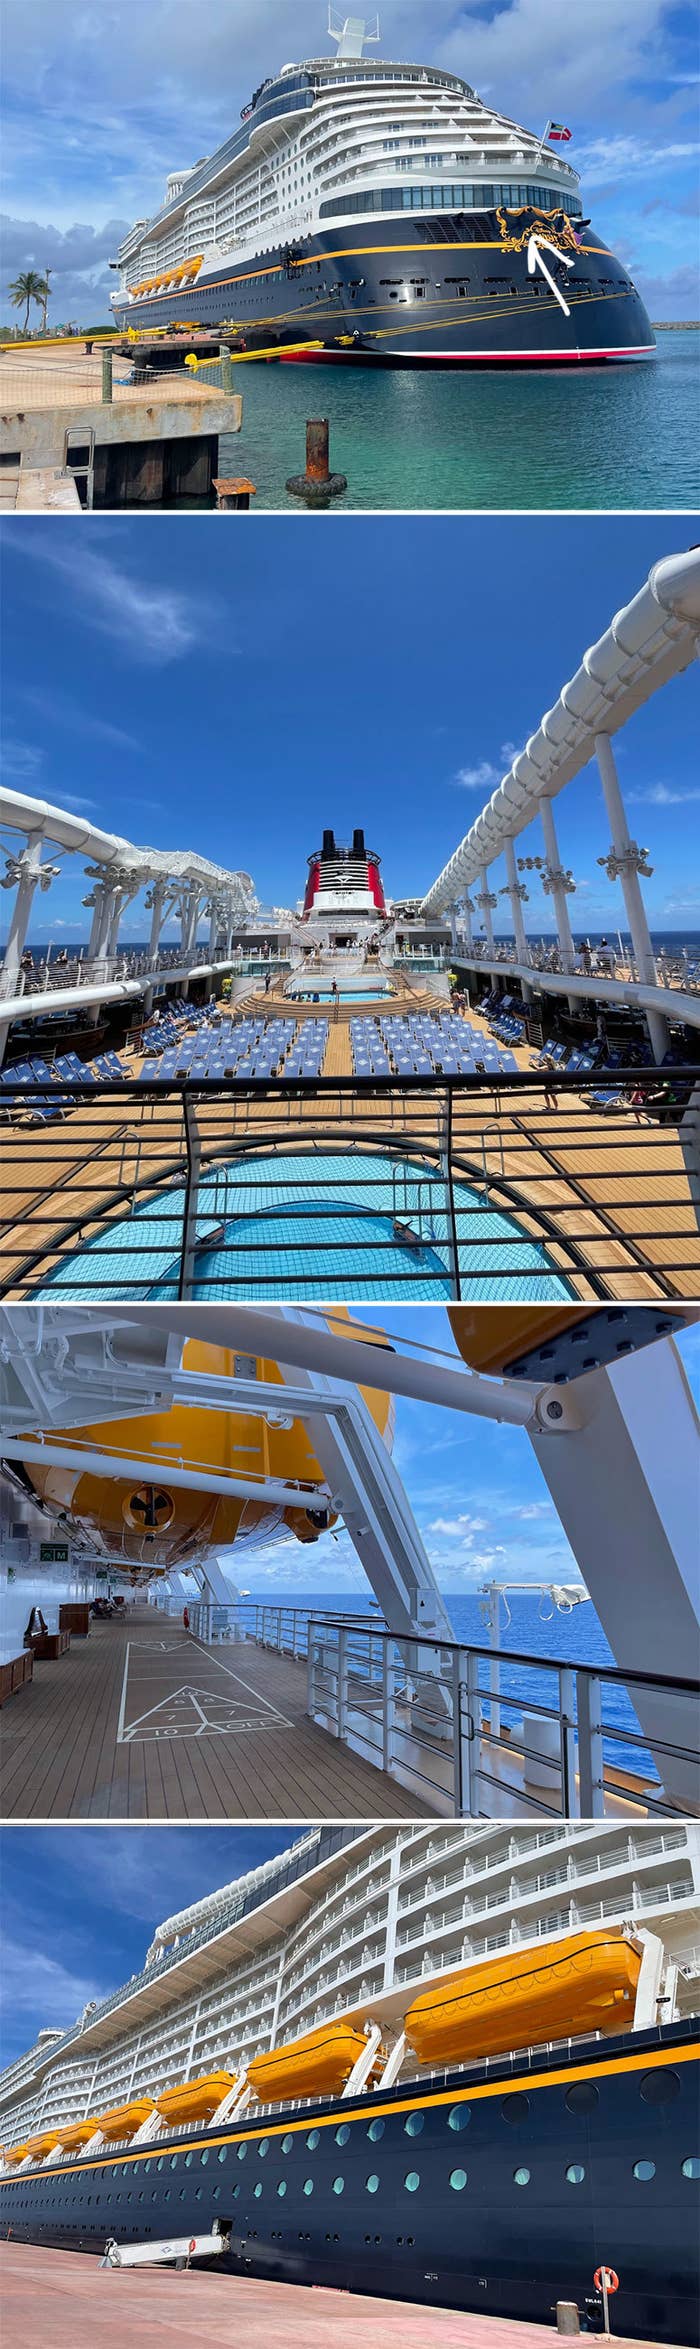 the pool and expansive deck of the cruise ship